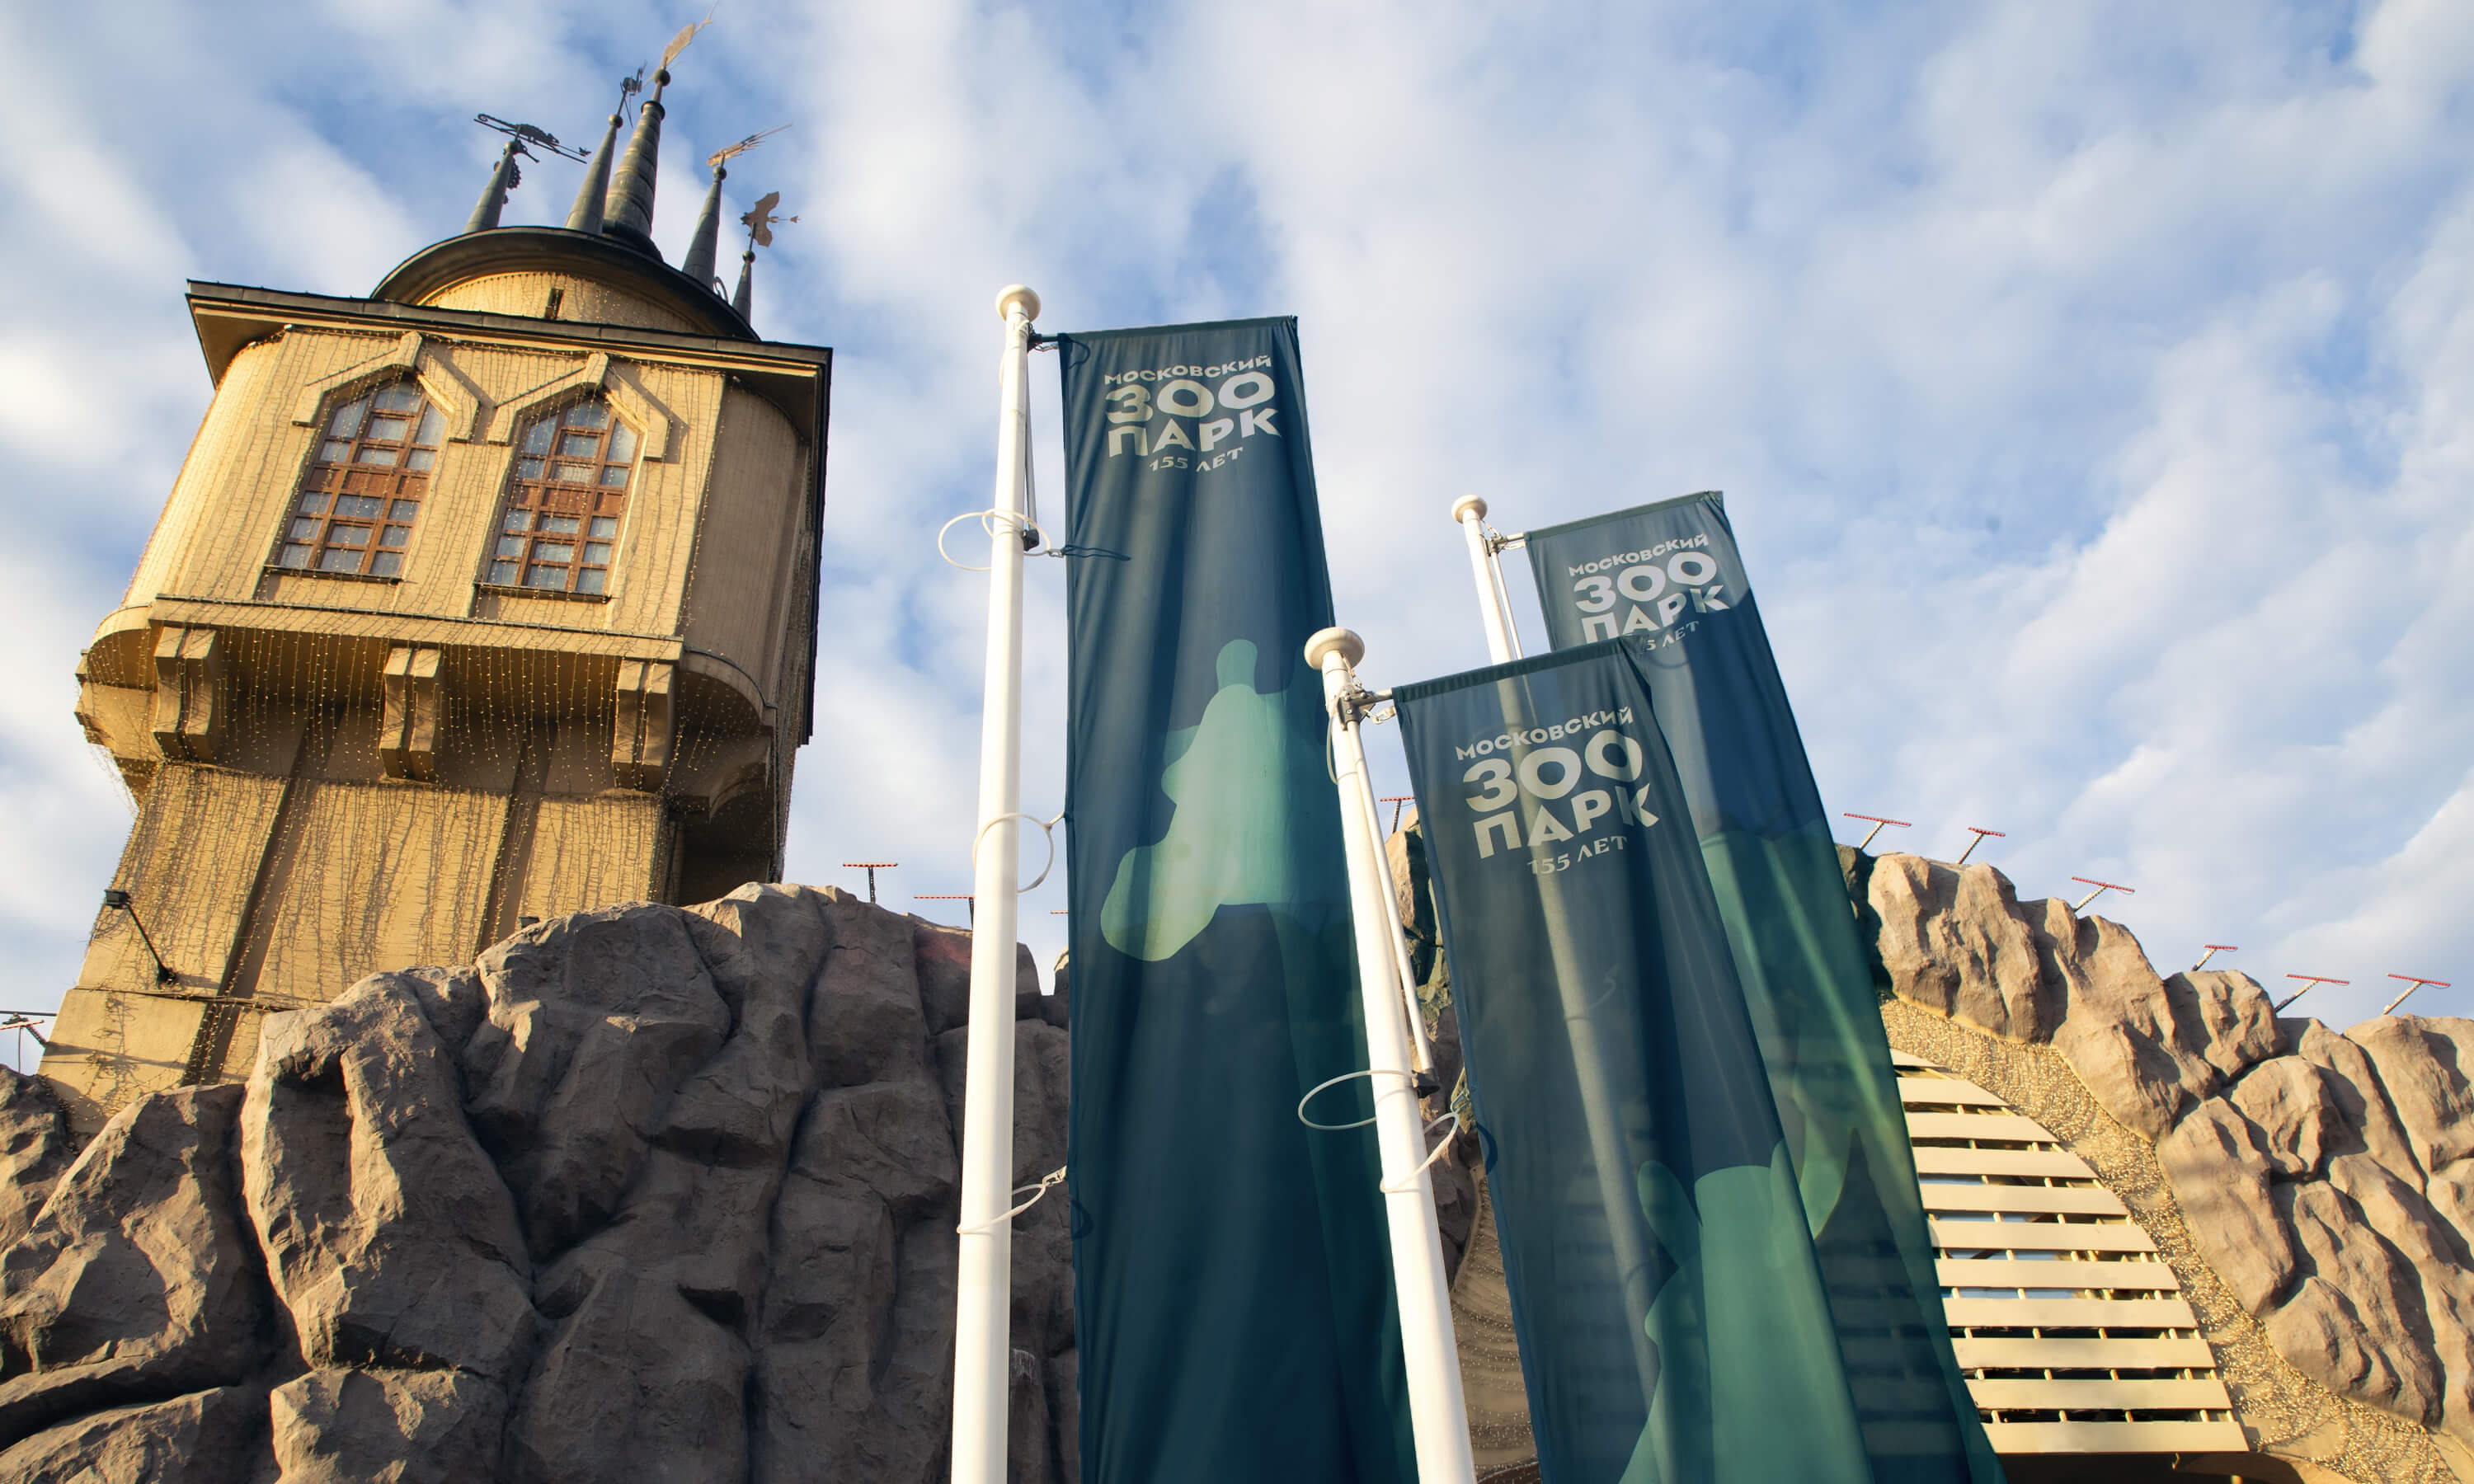 moscow zoo identity flags